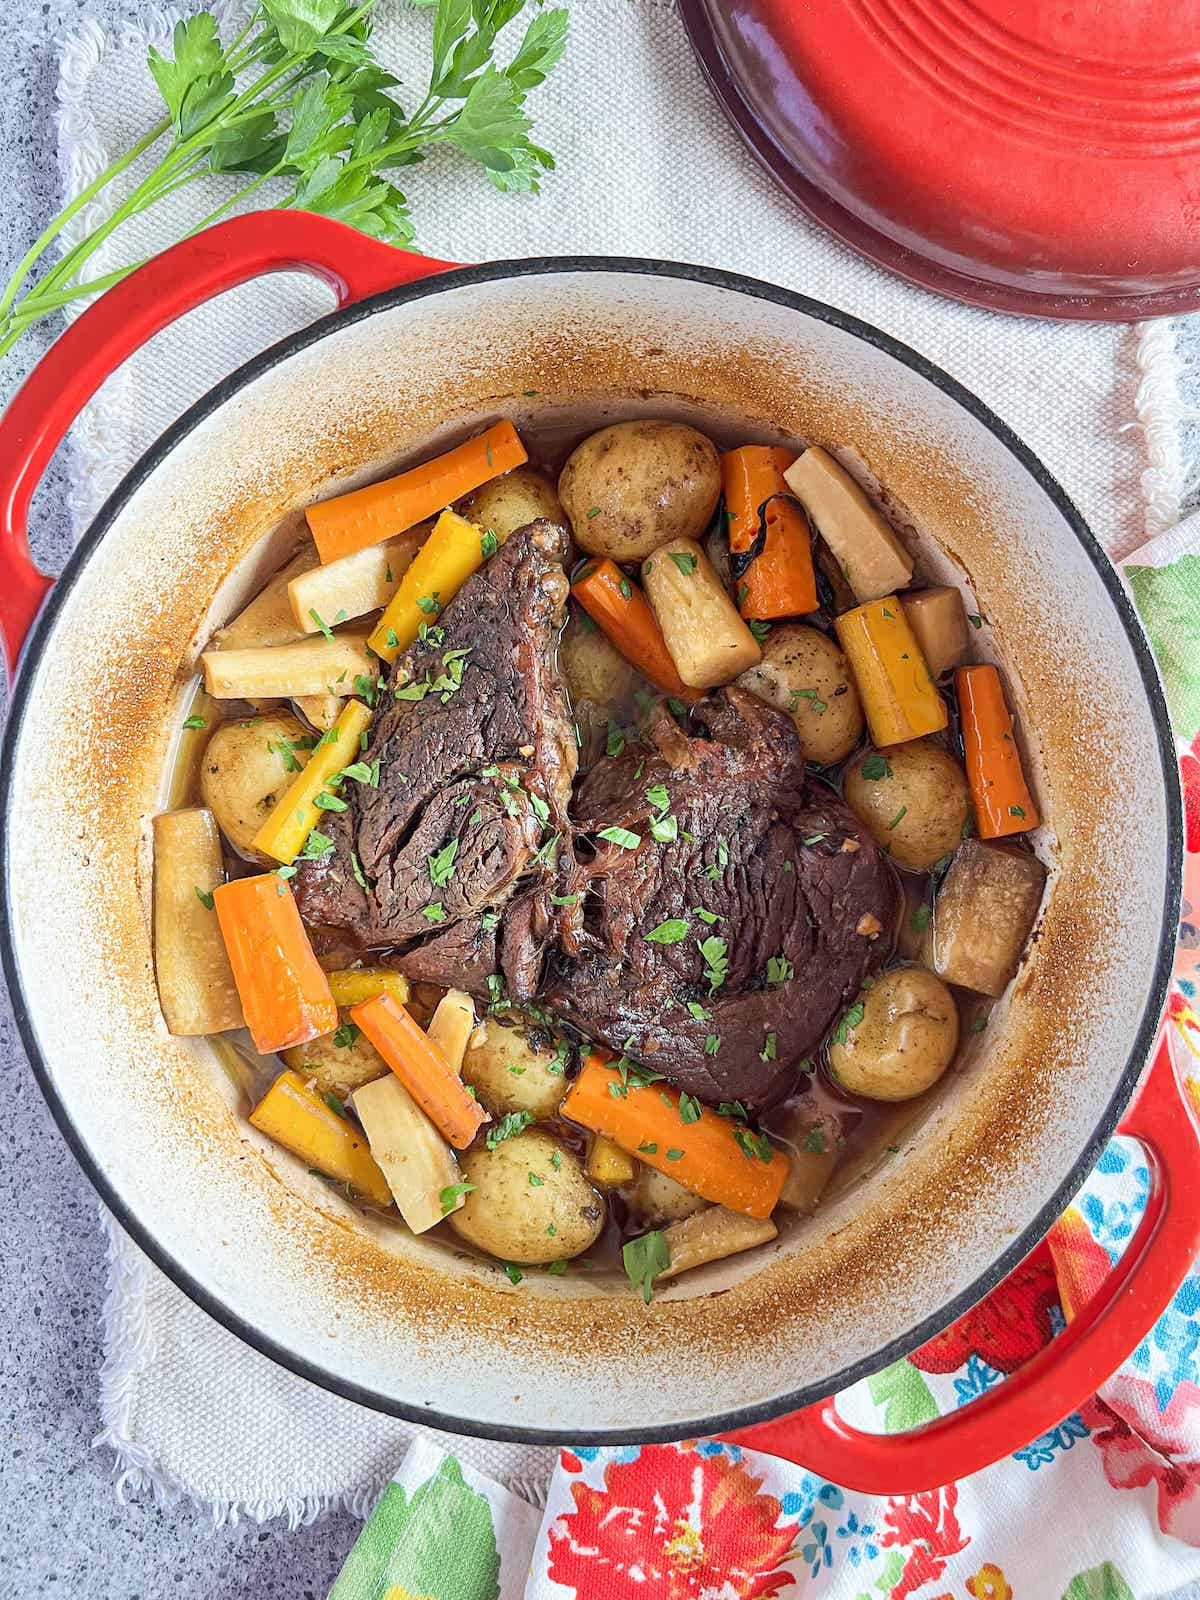 Pot roast and veggies in a red dutch oven.